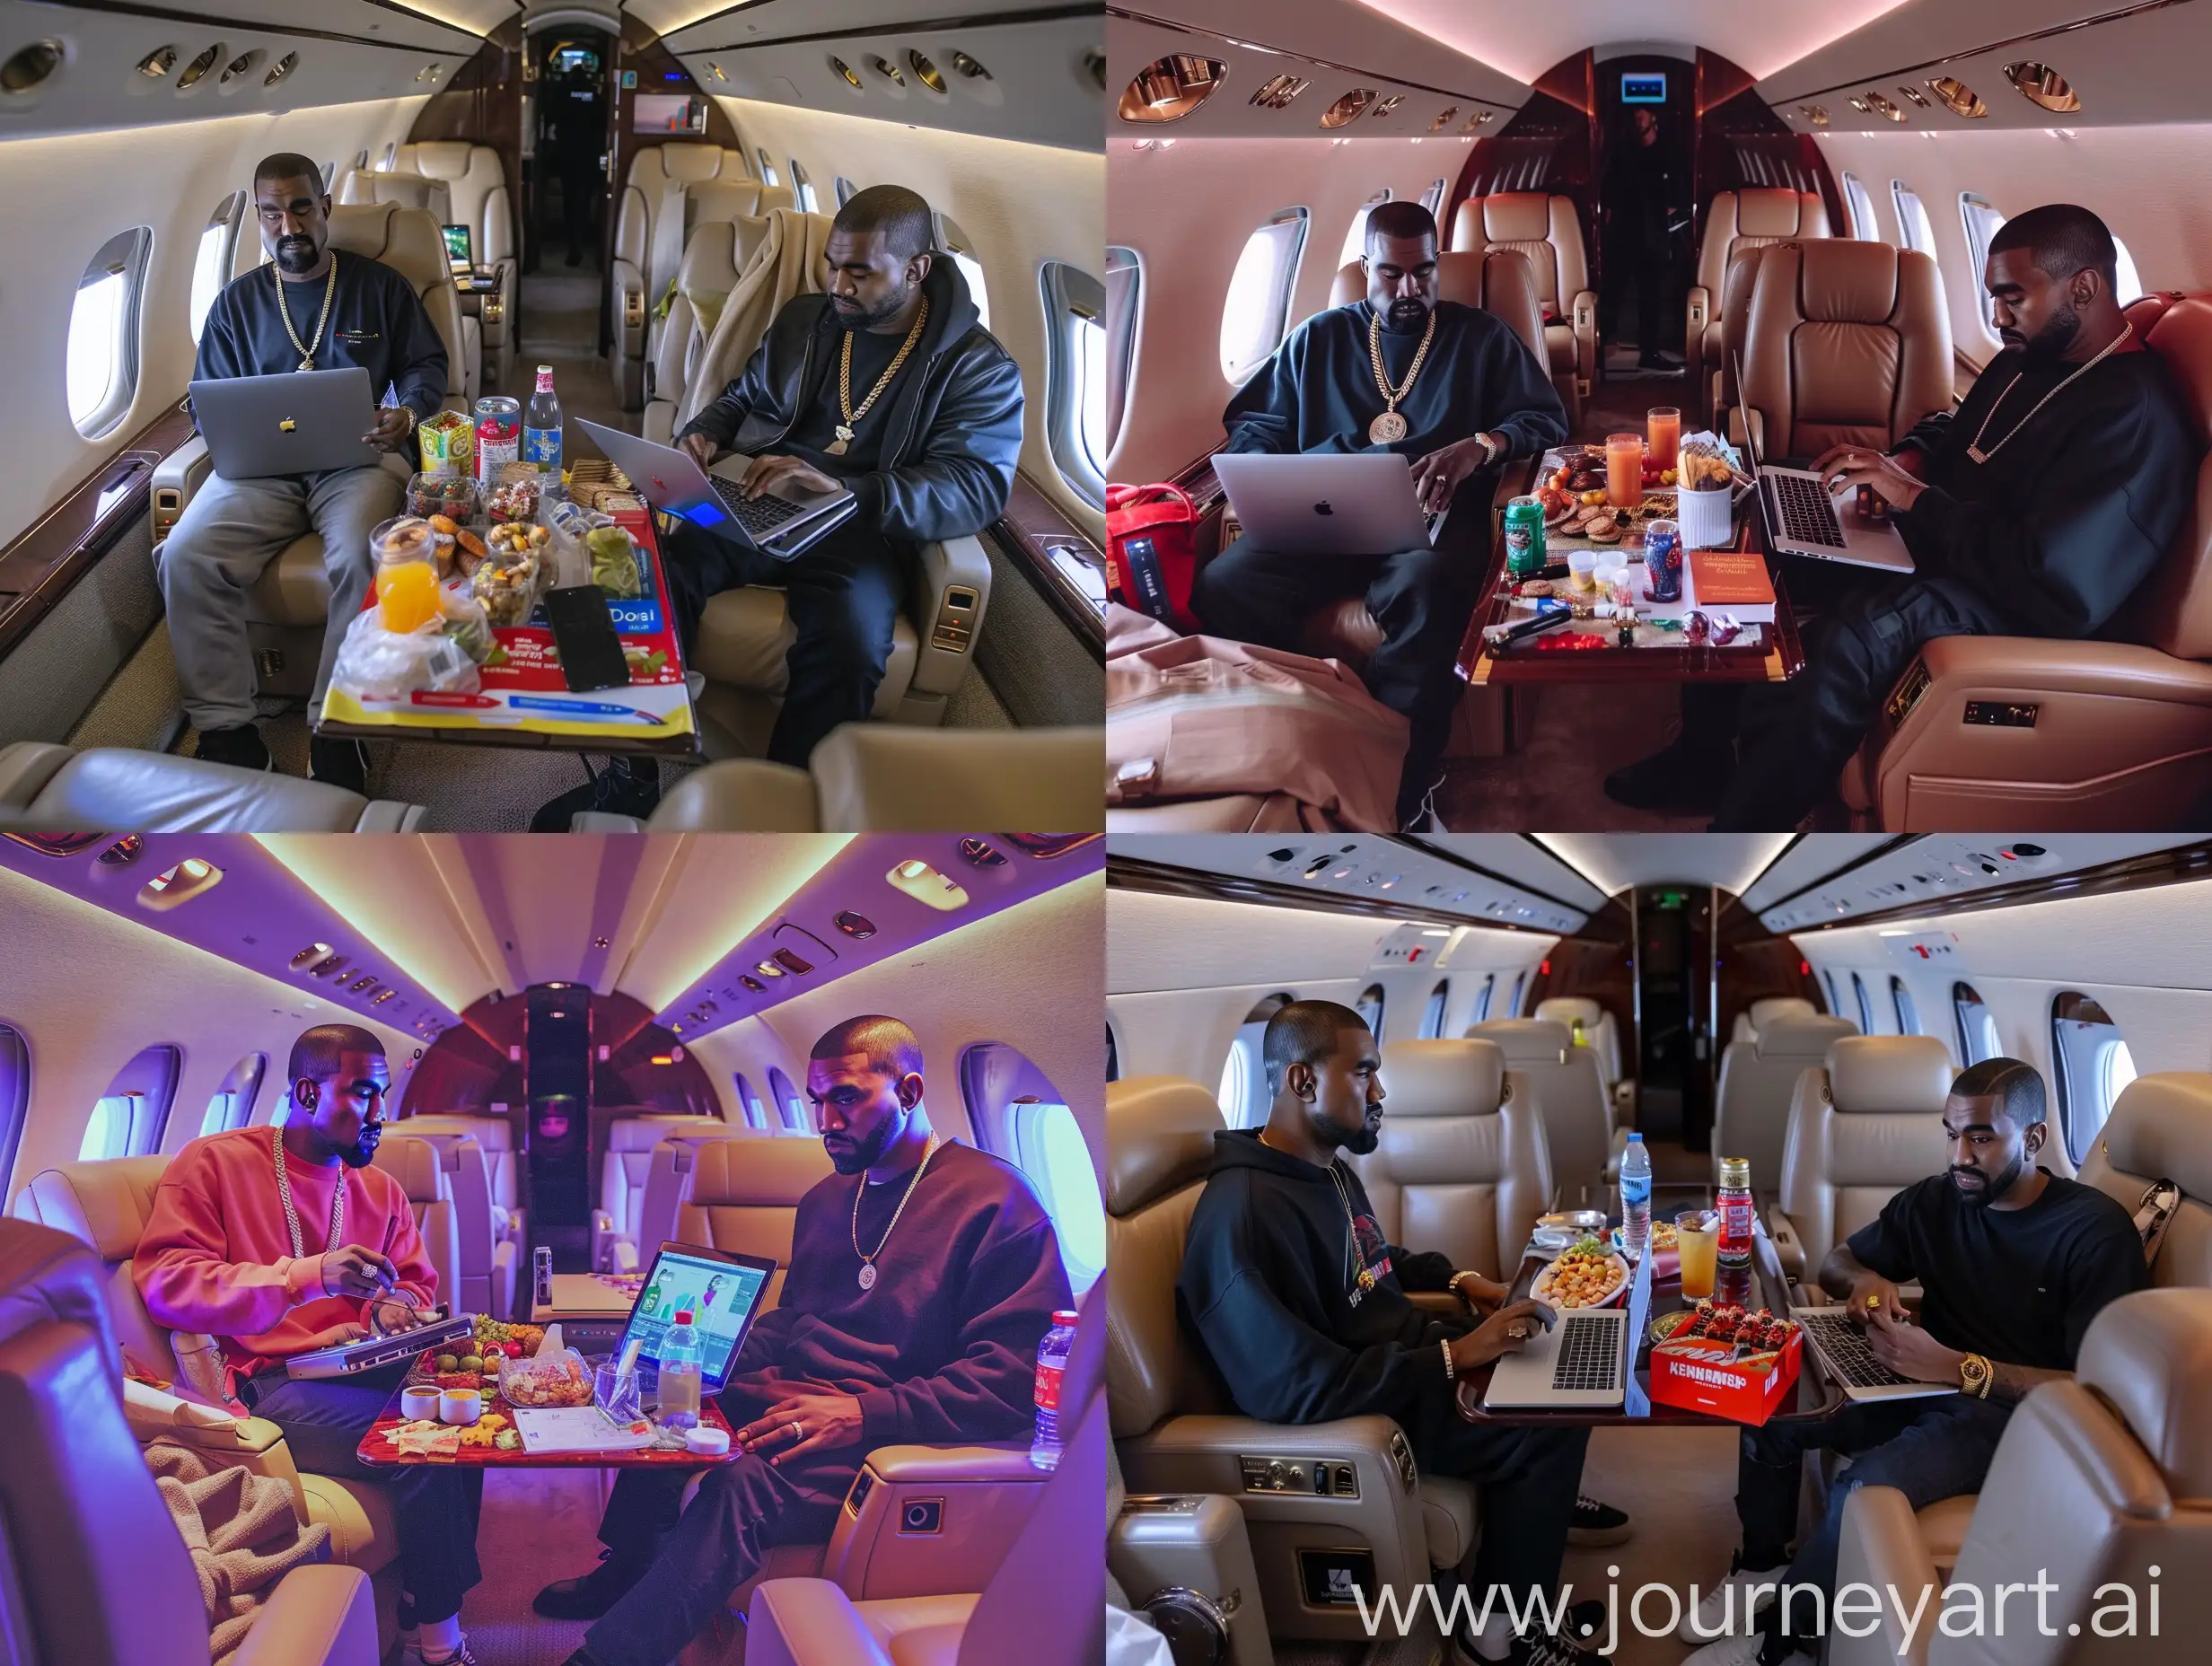 Kanye West and Drake in a private jet, flying to a major music award ceremony. They are seated in plush, leather seats, with a table between them covered in snacks, drinks, and laptops. Kanye is showing Drake some new beats on his laptop, while Drake listens intently and nods along. The interior of the jet is luxurious, with mood lighting and personalized service